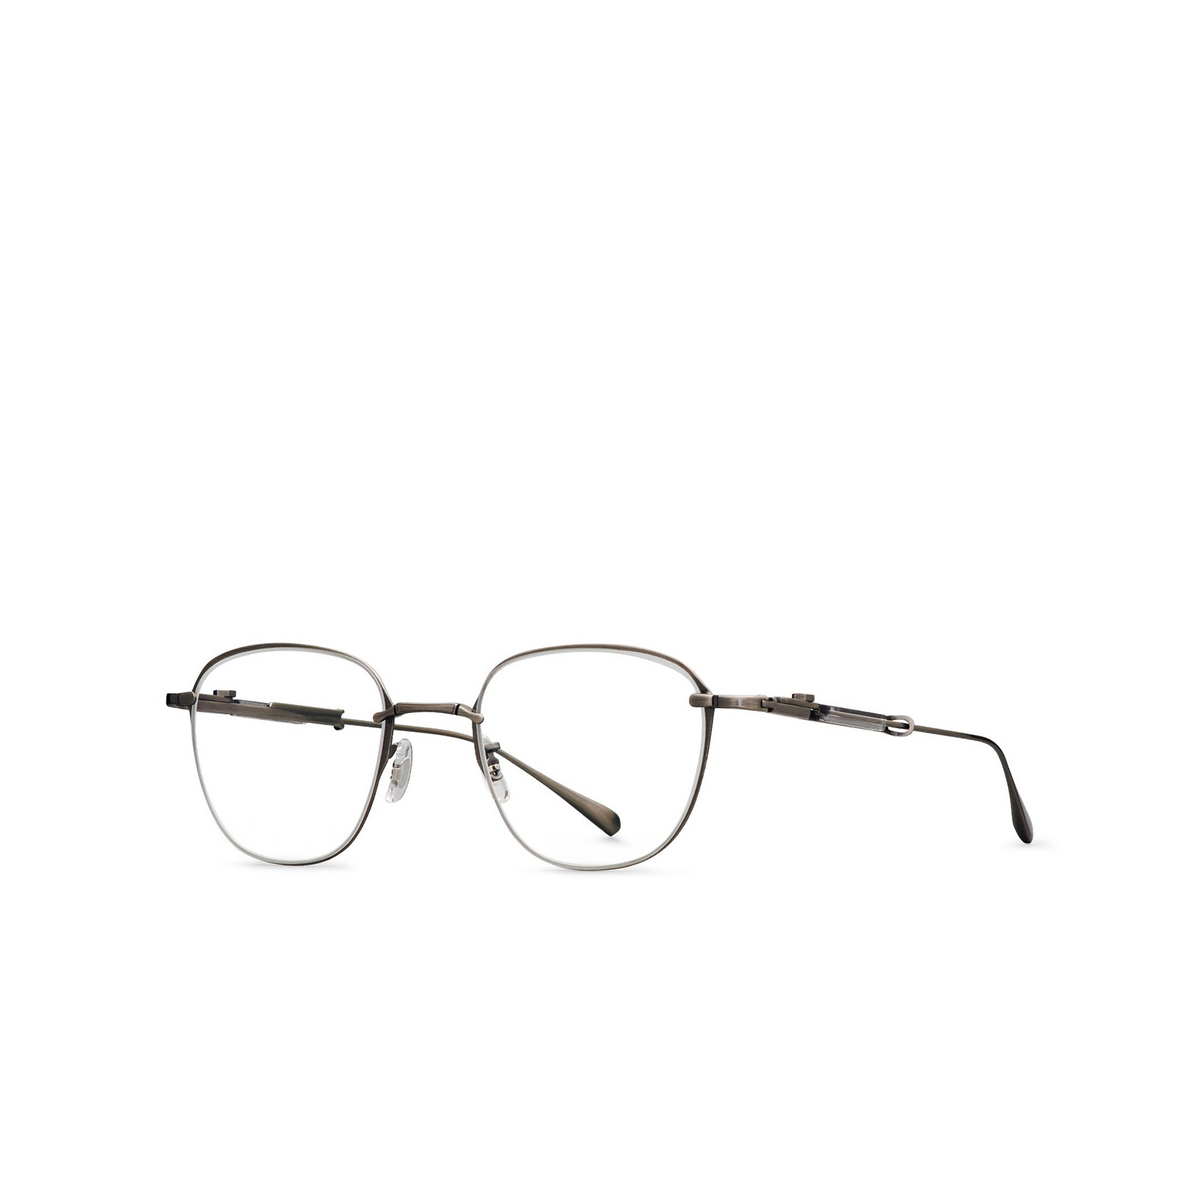 Mr. Leight GRIFFITH CL Eyeglasses PW-GRYSTN Pewter-Greystone - 2/3